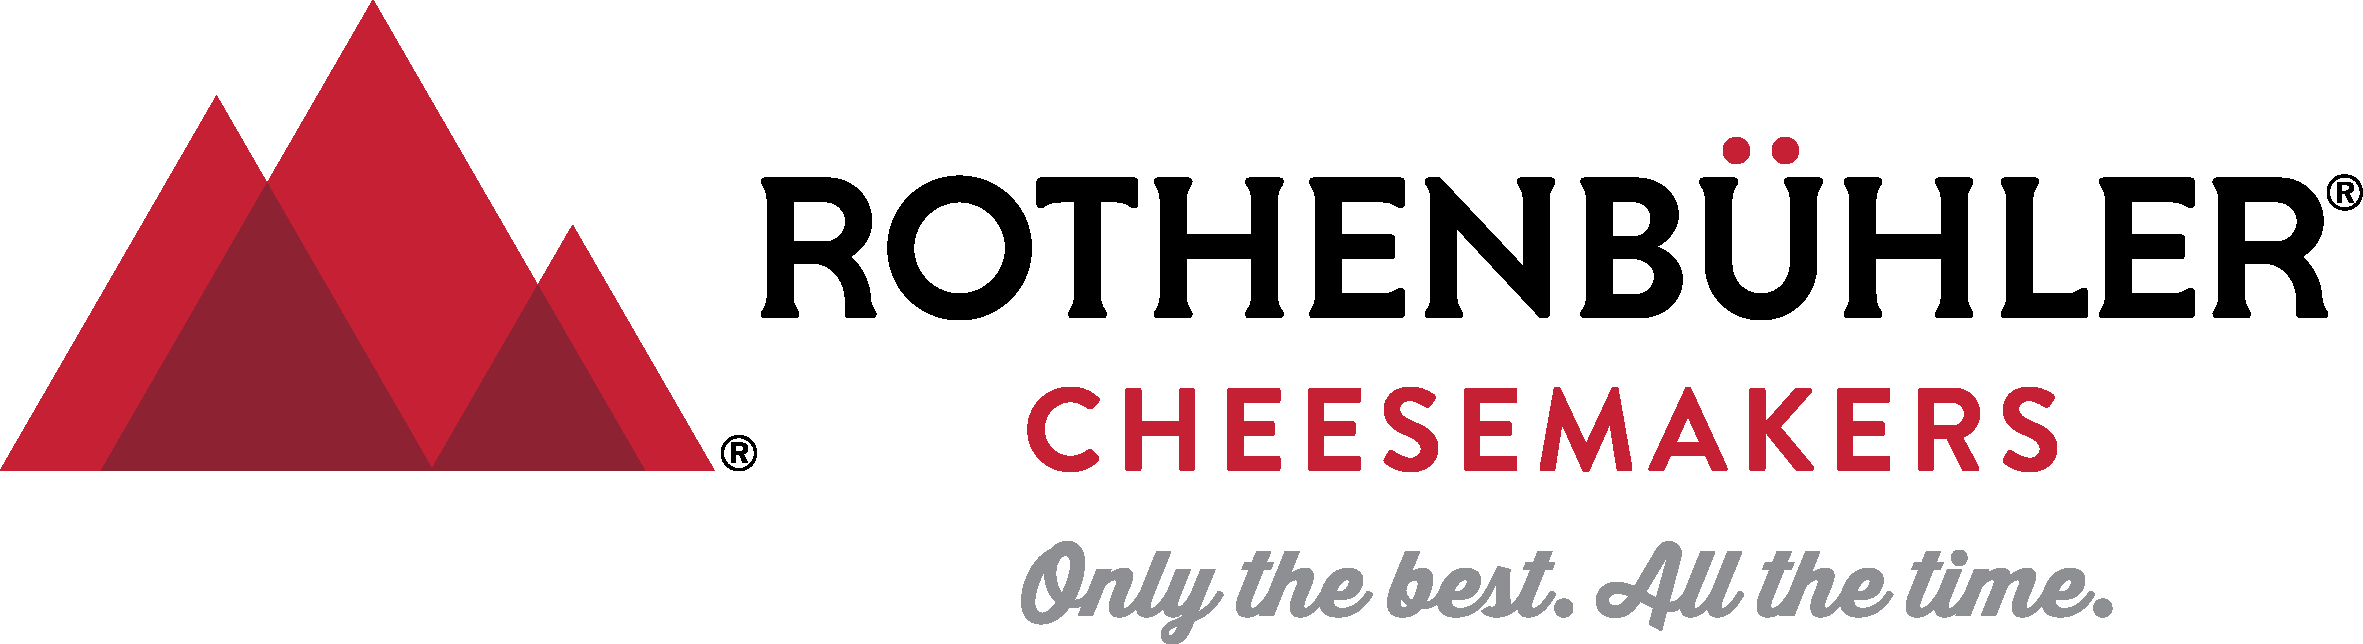 Rotenbuhler Cheesemakers Sponsors